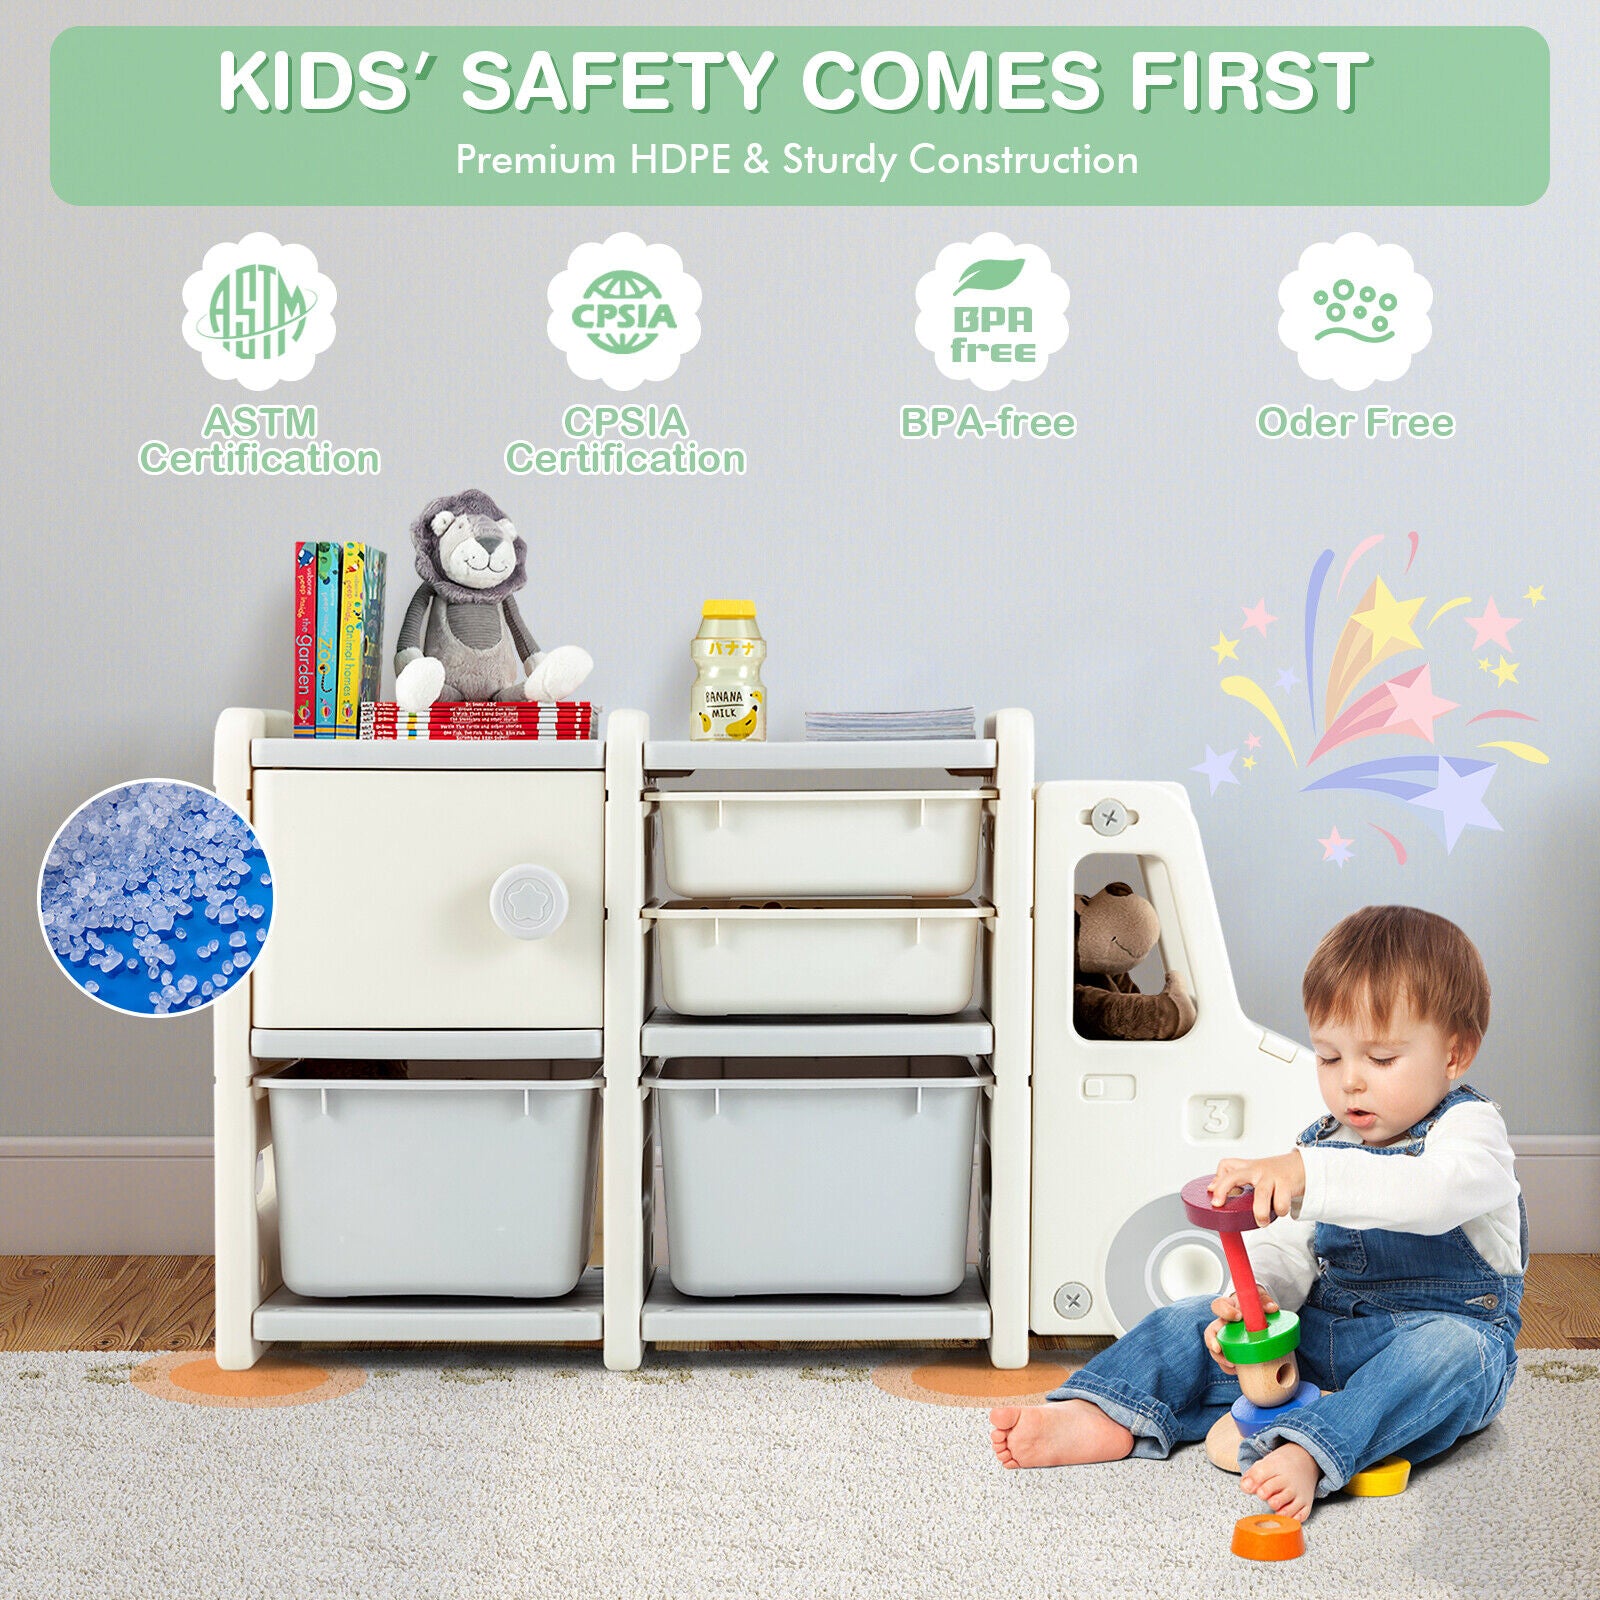 Child-Safe Material: The kids' toy organizer is made of high-quality HDPE material, which is durable, BPA-free, odorless, and safe for children. The sleek edges and rounded corners minimize the risk of bumps or scratches, while the stable construction ensures it remains steady and prevents tipping over.